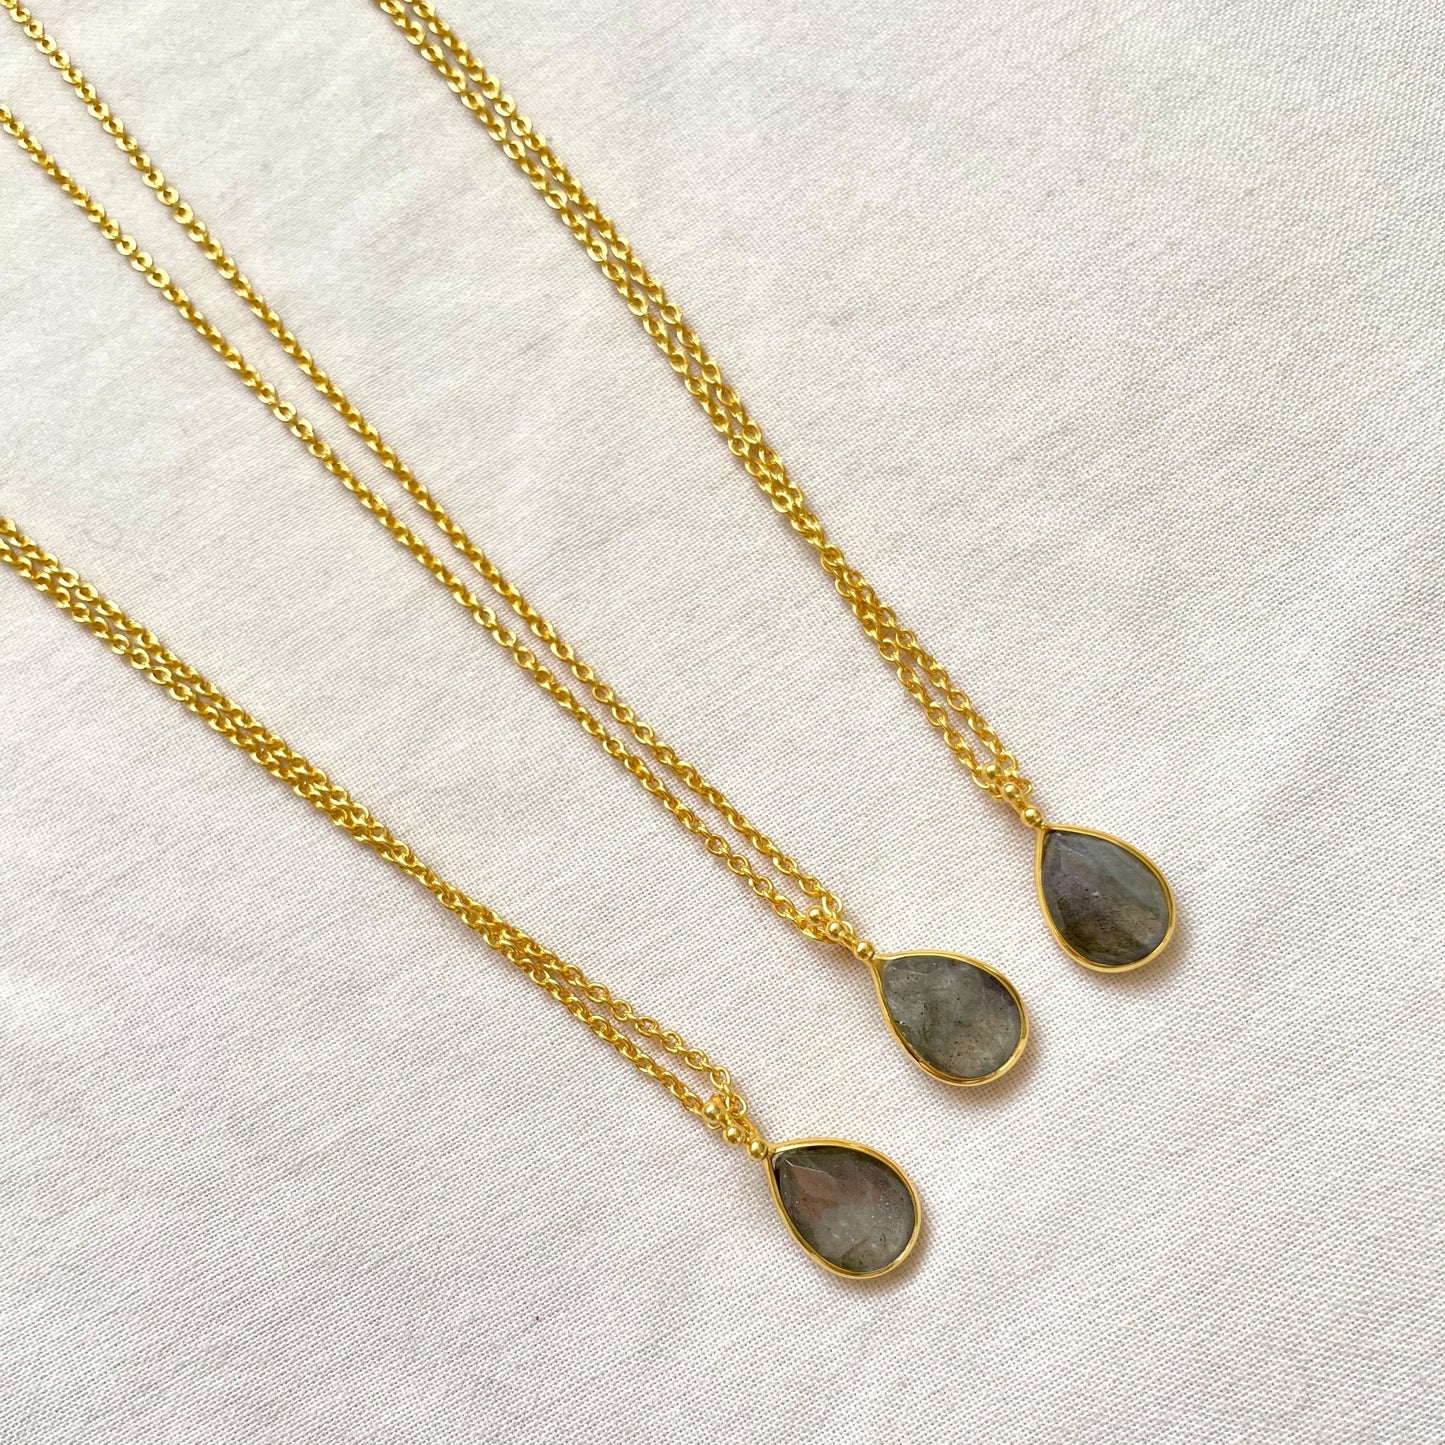 Lapradorite Necklace, Gold Plated on 925 Sterling Silver, handmade gemstone necklace by Brinda, Unique Gift for her, Unique necklace, gemstones, gold, chain, Crystal, trending, mothers day gift, small business, london, dainty necklace, Drop, Cute